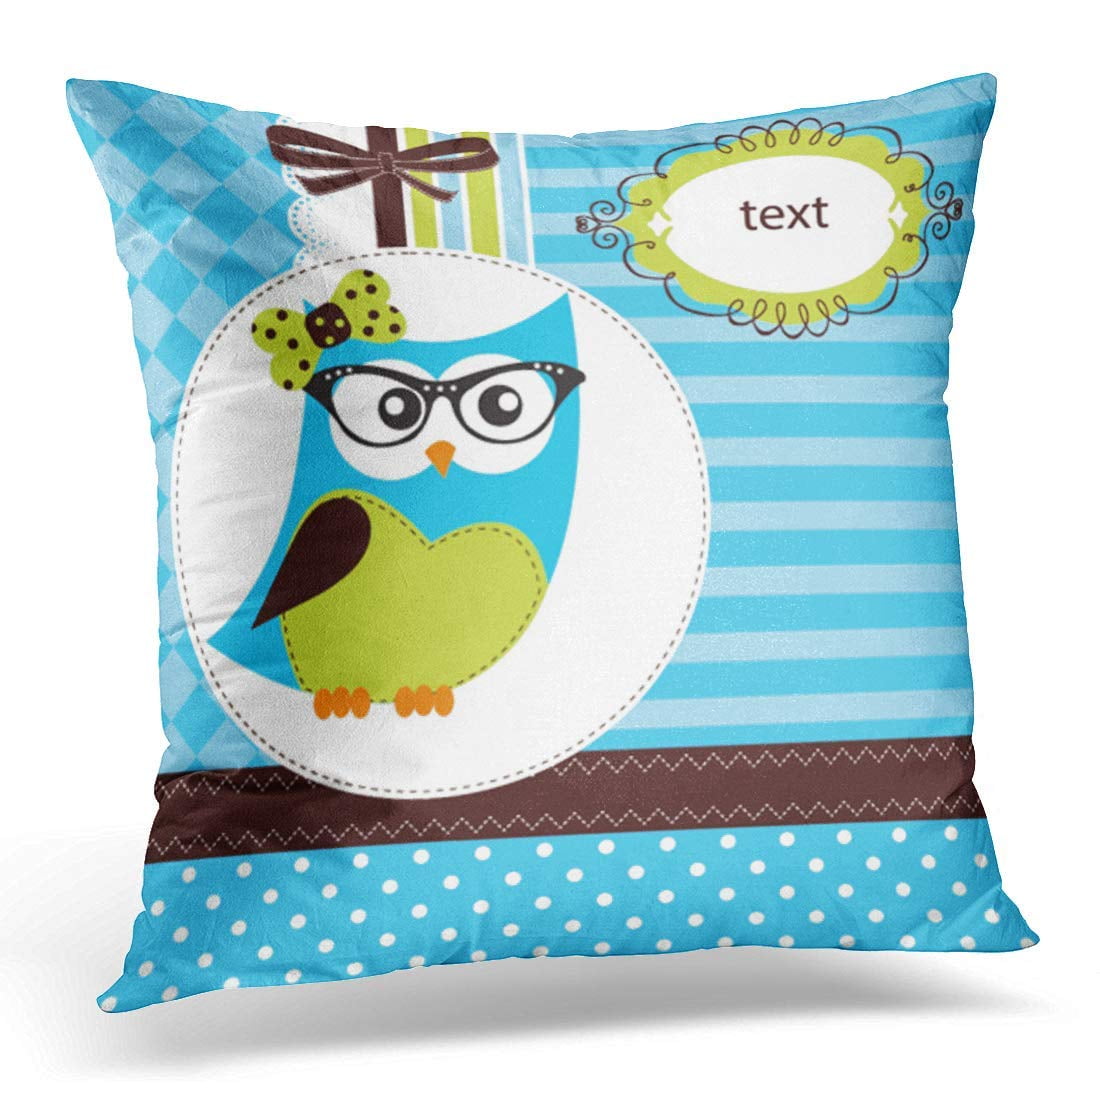 Owl with Tree Cute Cartoon Childs Gift Pillowcase 